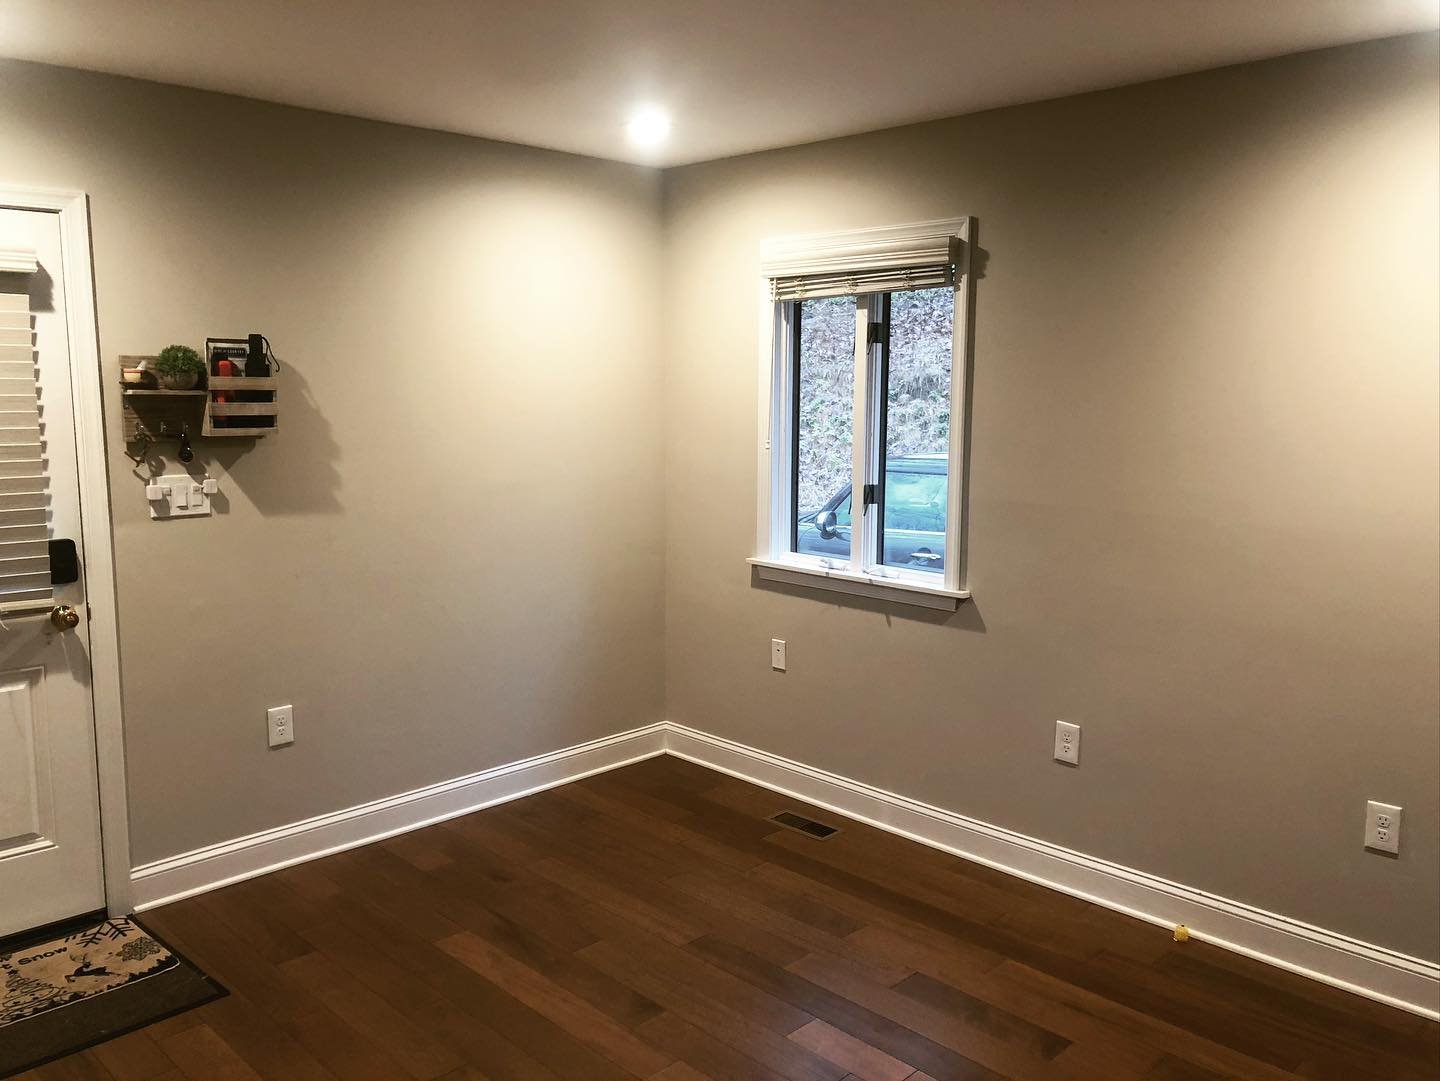  For this project the client was looking for a way to make this corner of their first floor more useful as a seating area and a mini-mudroom of sorts by their entry. 